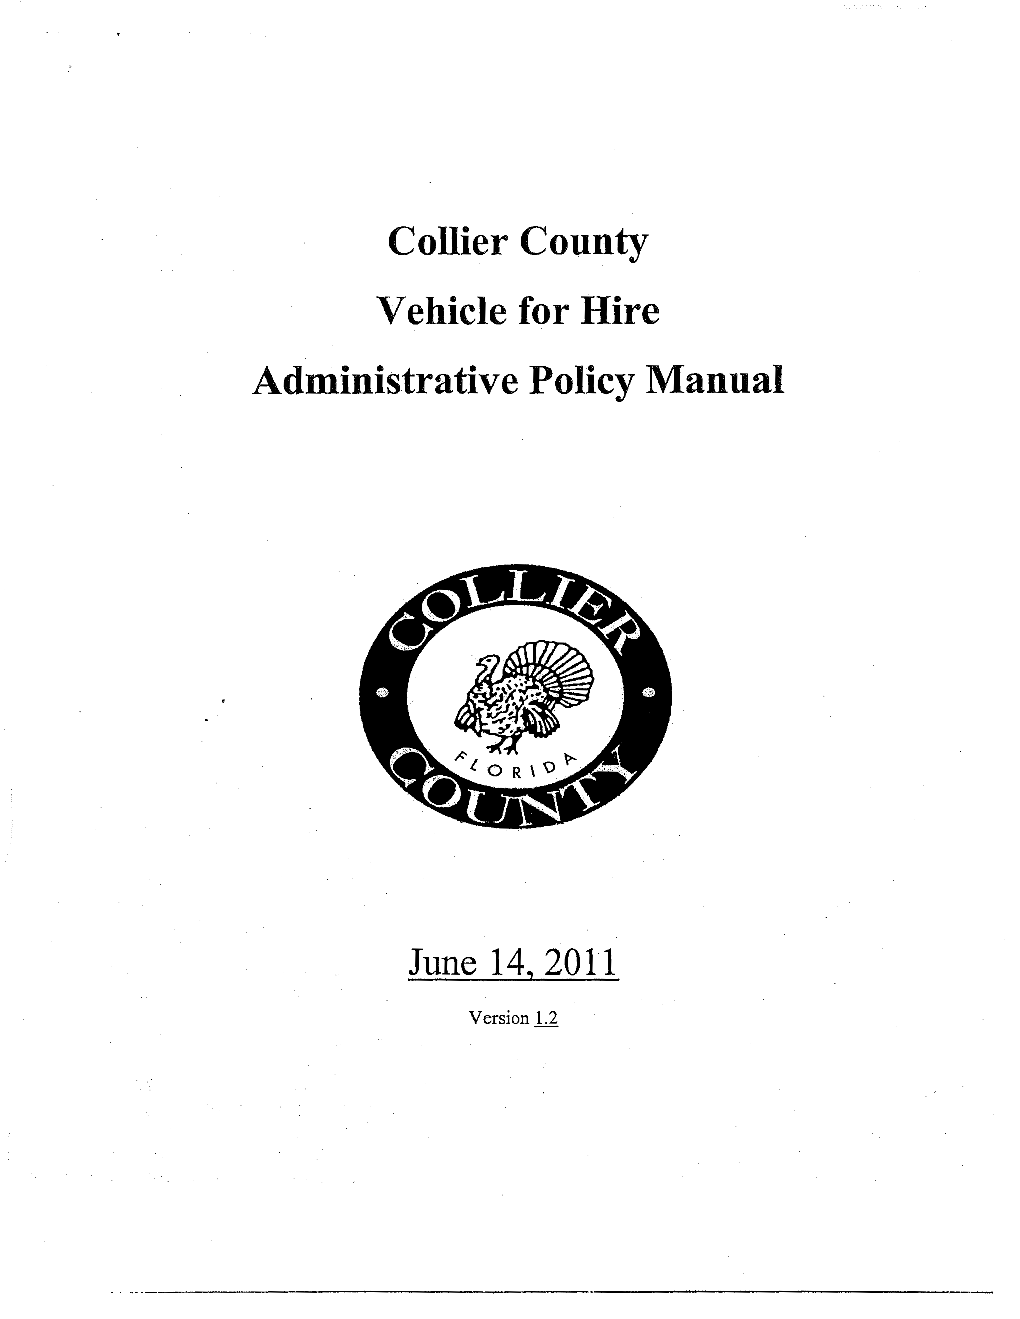 Collier County Vehicle for Hire Administrative Policy Manual